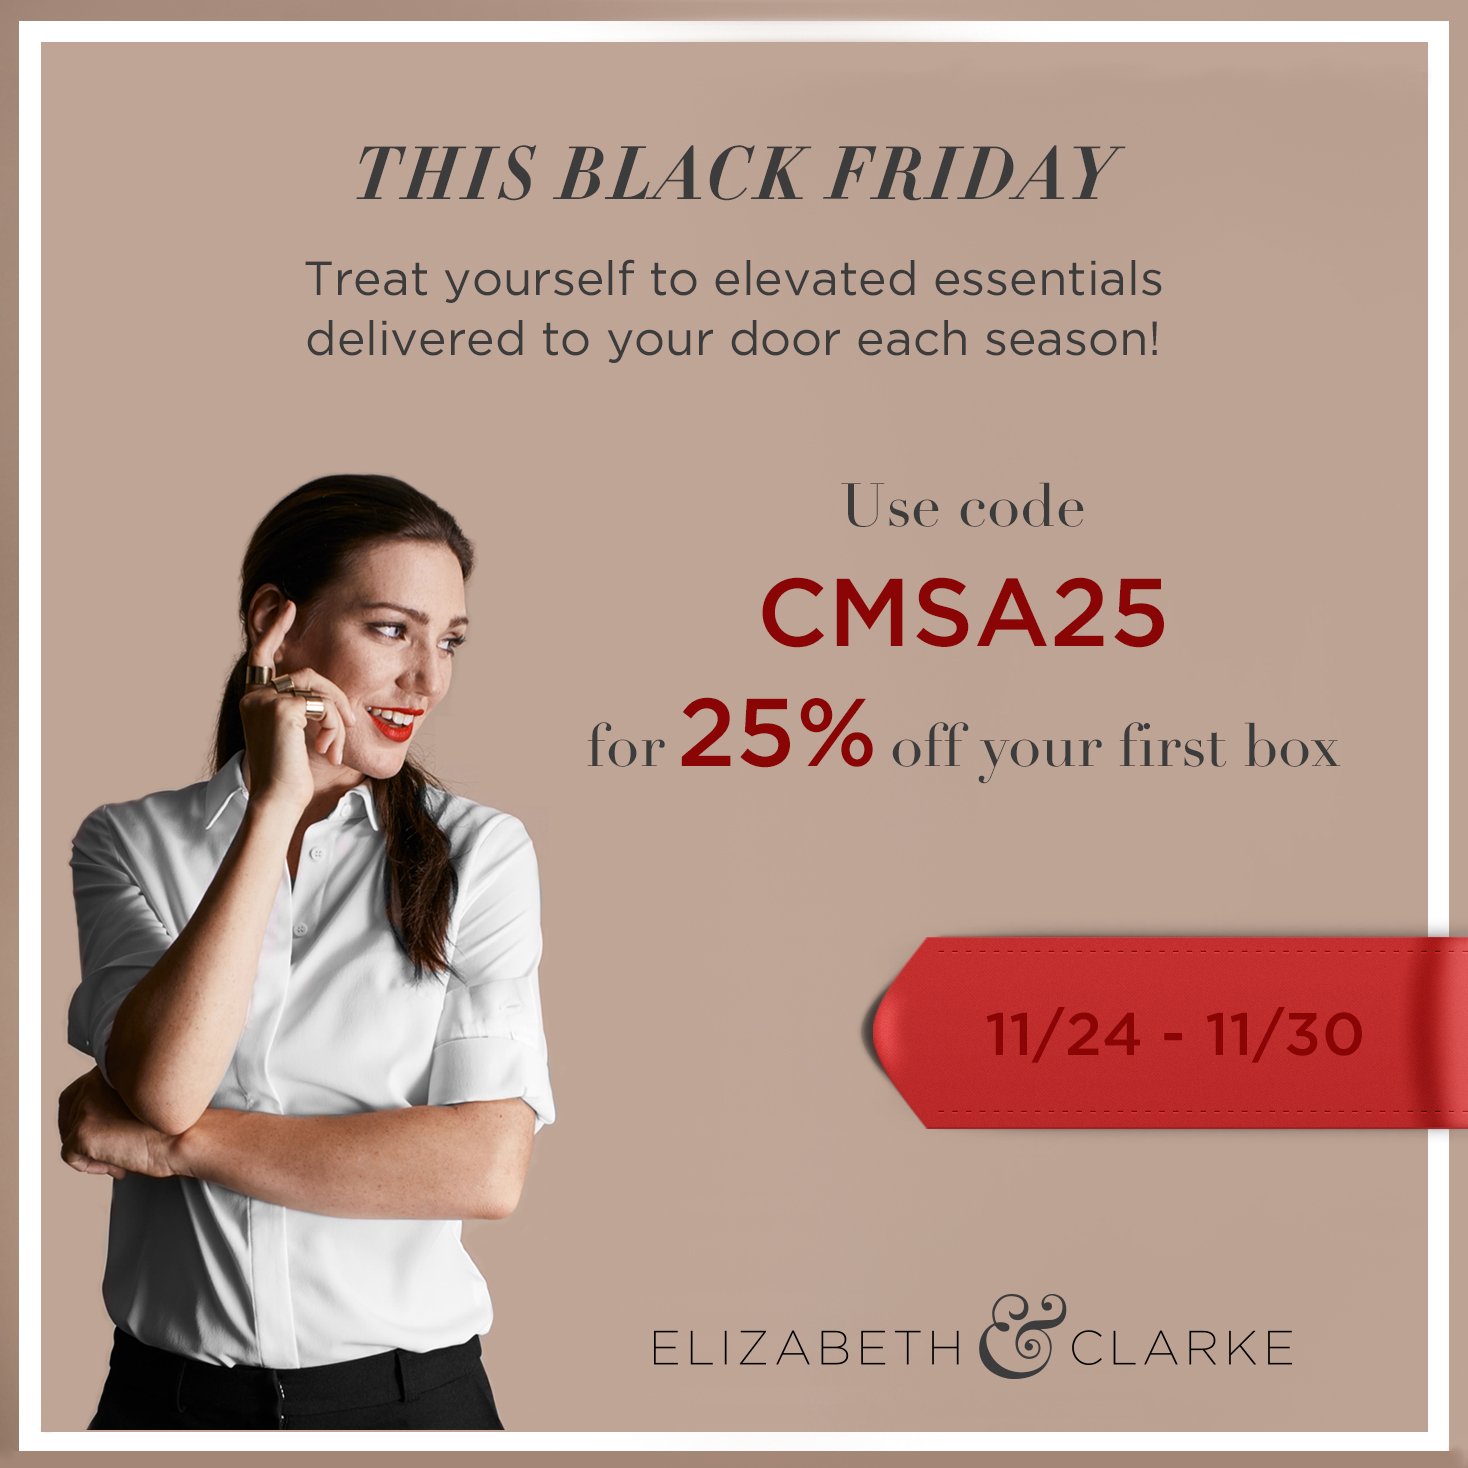 Elizabeth & Clarke Exclusive Black Friday Deal – 25% Off Your First Box!